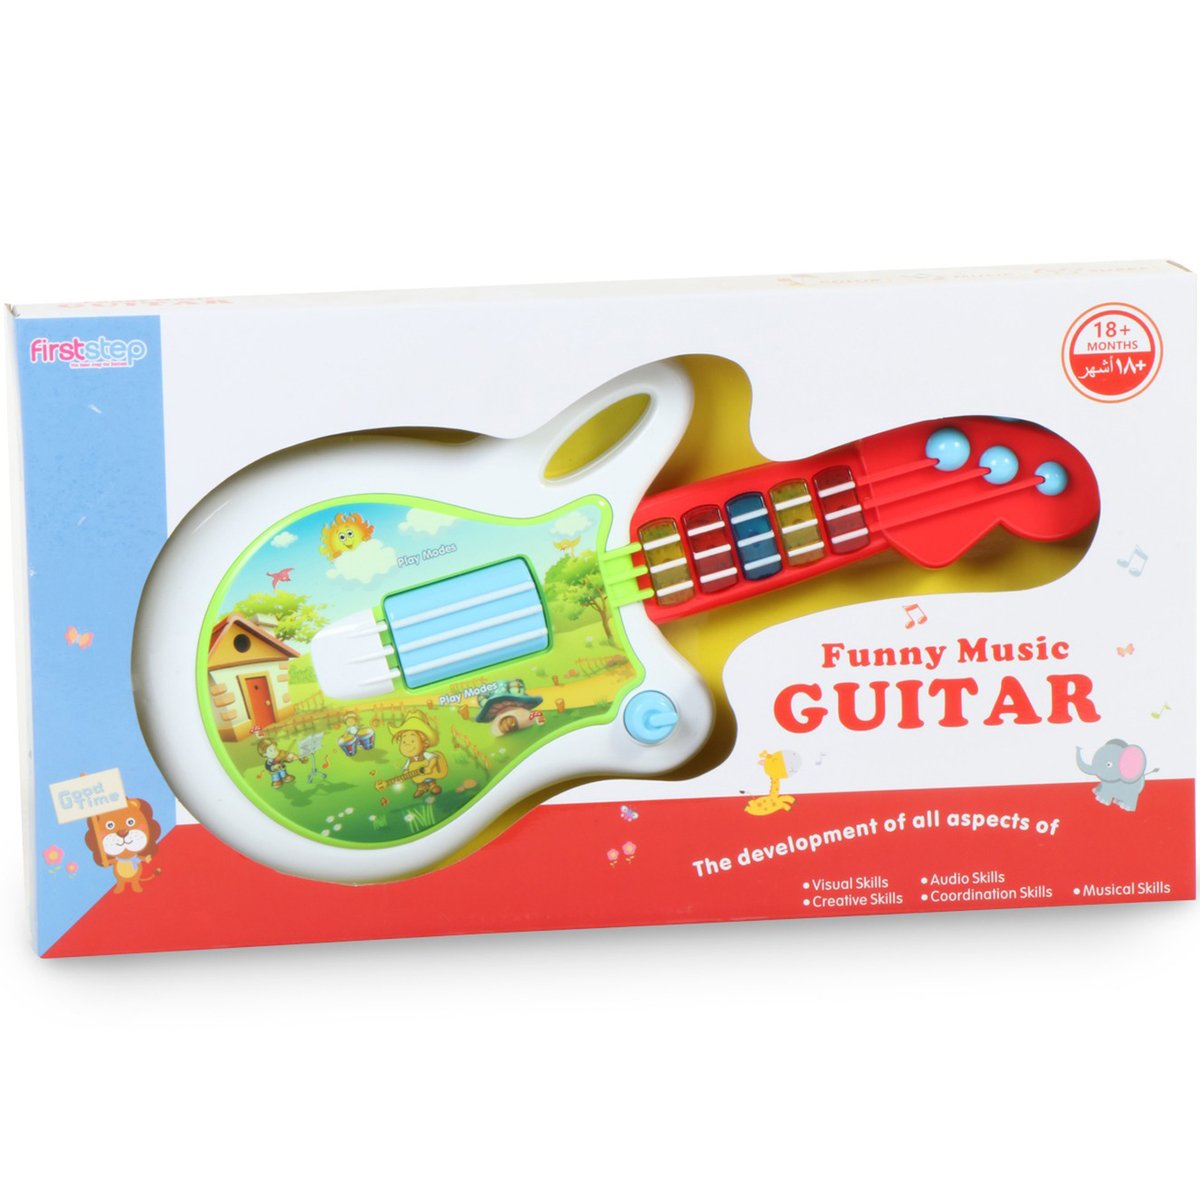 First Step Funny Music Guitar KL244218